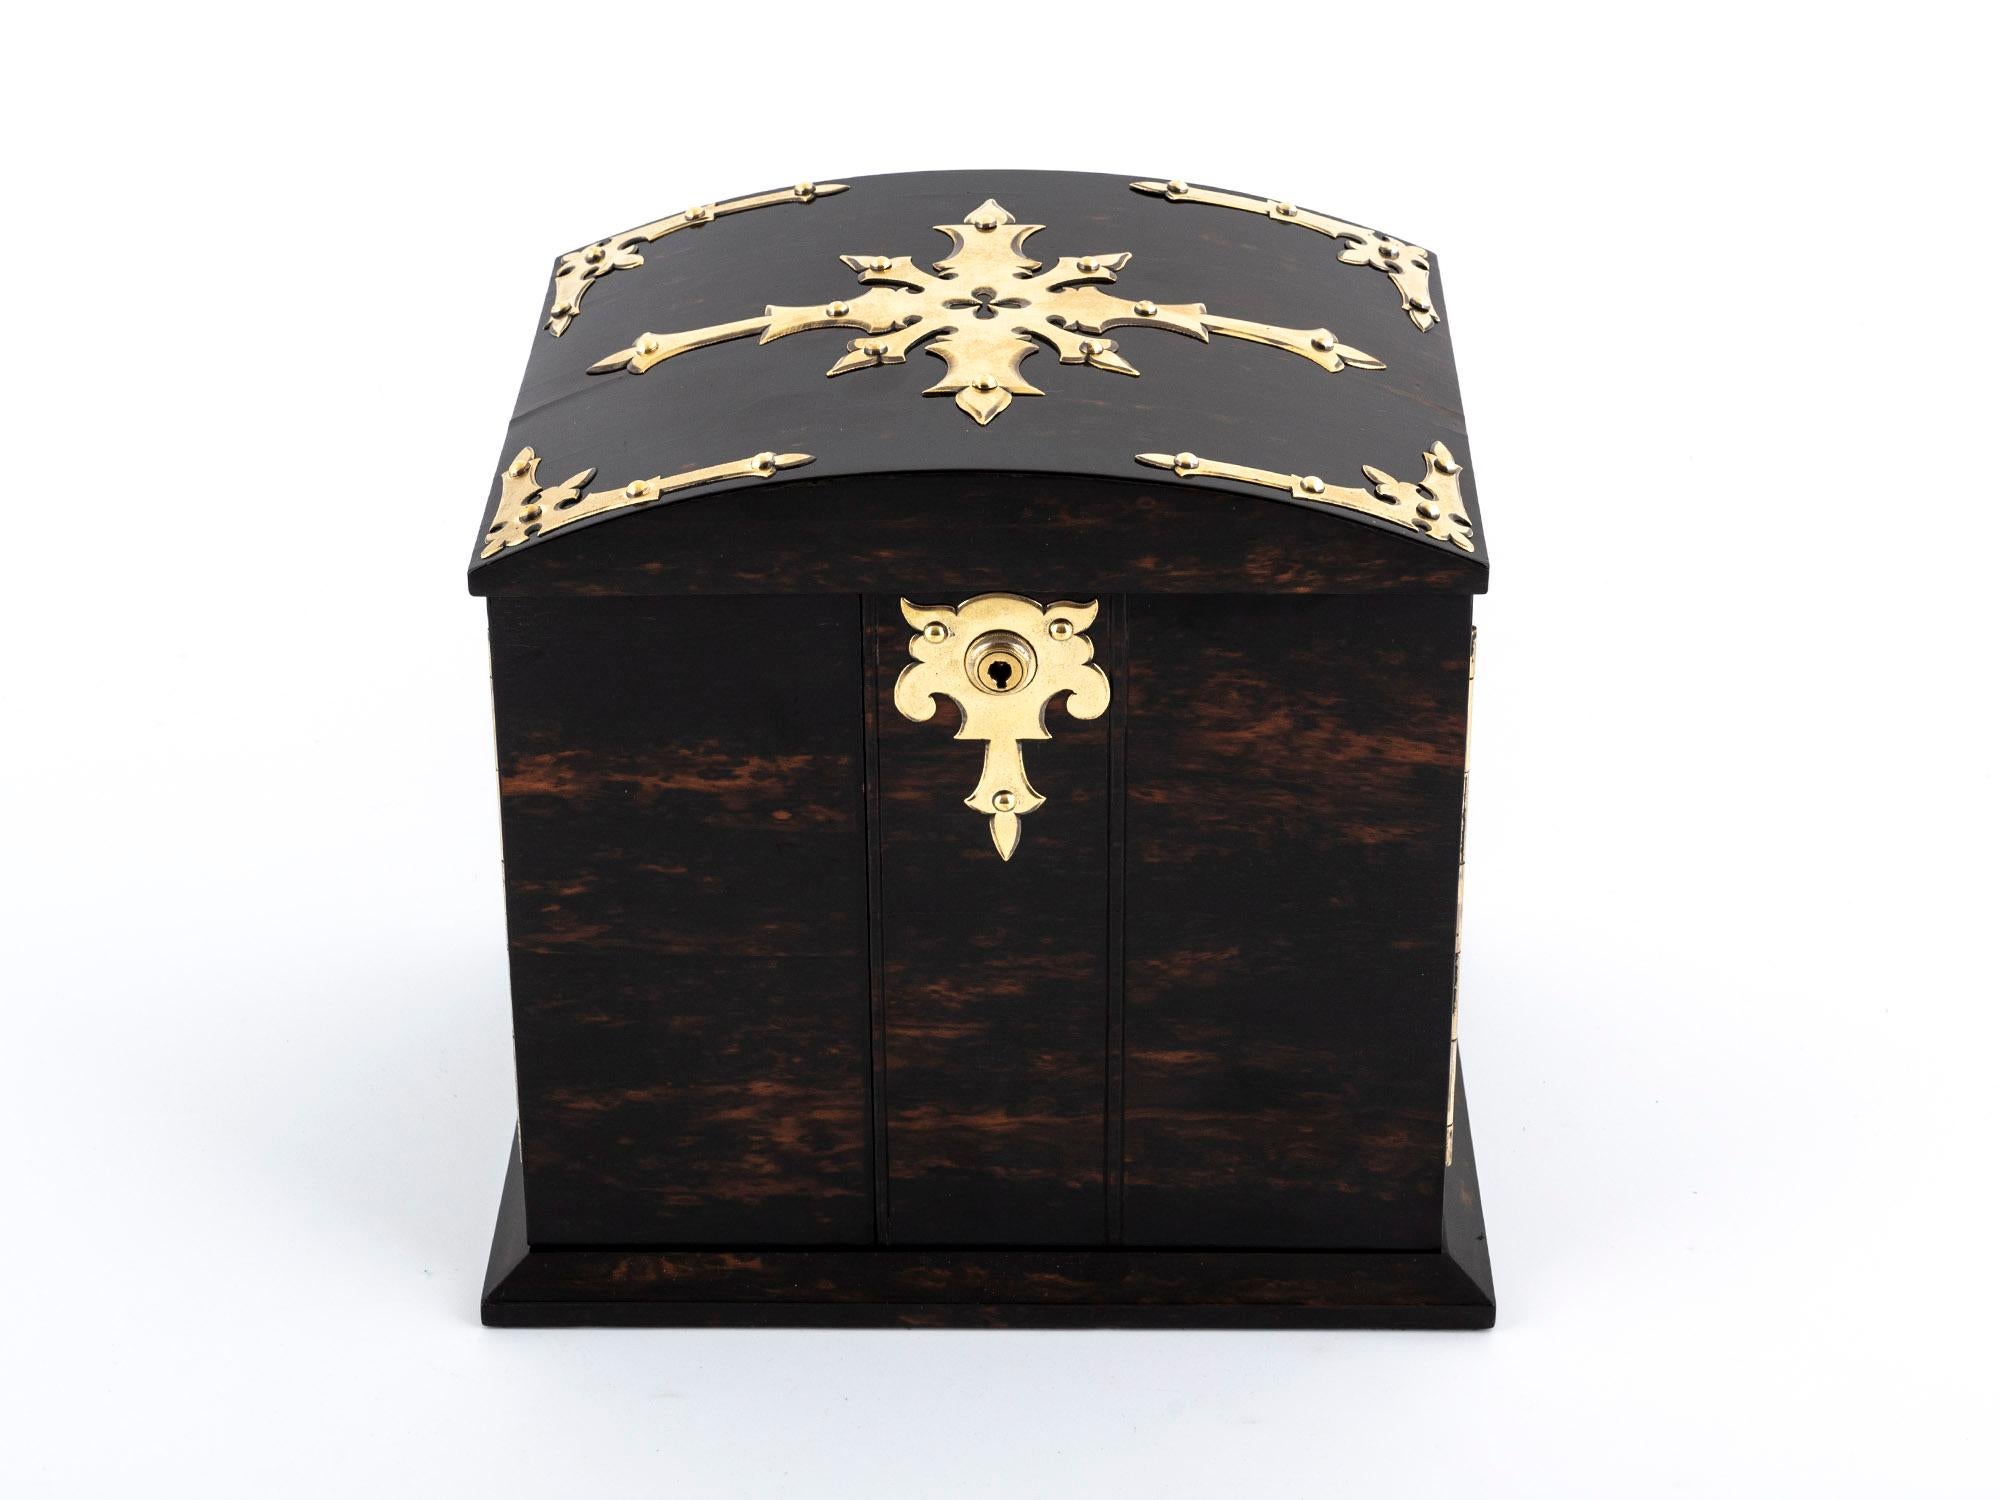 Discover this exquisite antique Coromandel Jewellery Cabinet by Betjemann & Son, an elegant, sophisticated work of art.

The dome-topped top is a distinguishing feature, and the intricate decorative inlay and fitted interior, coupled with brass